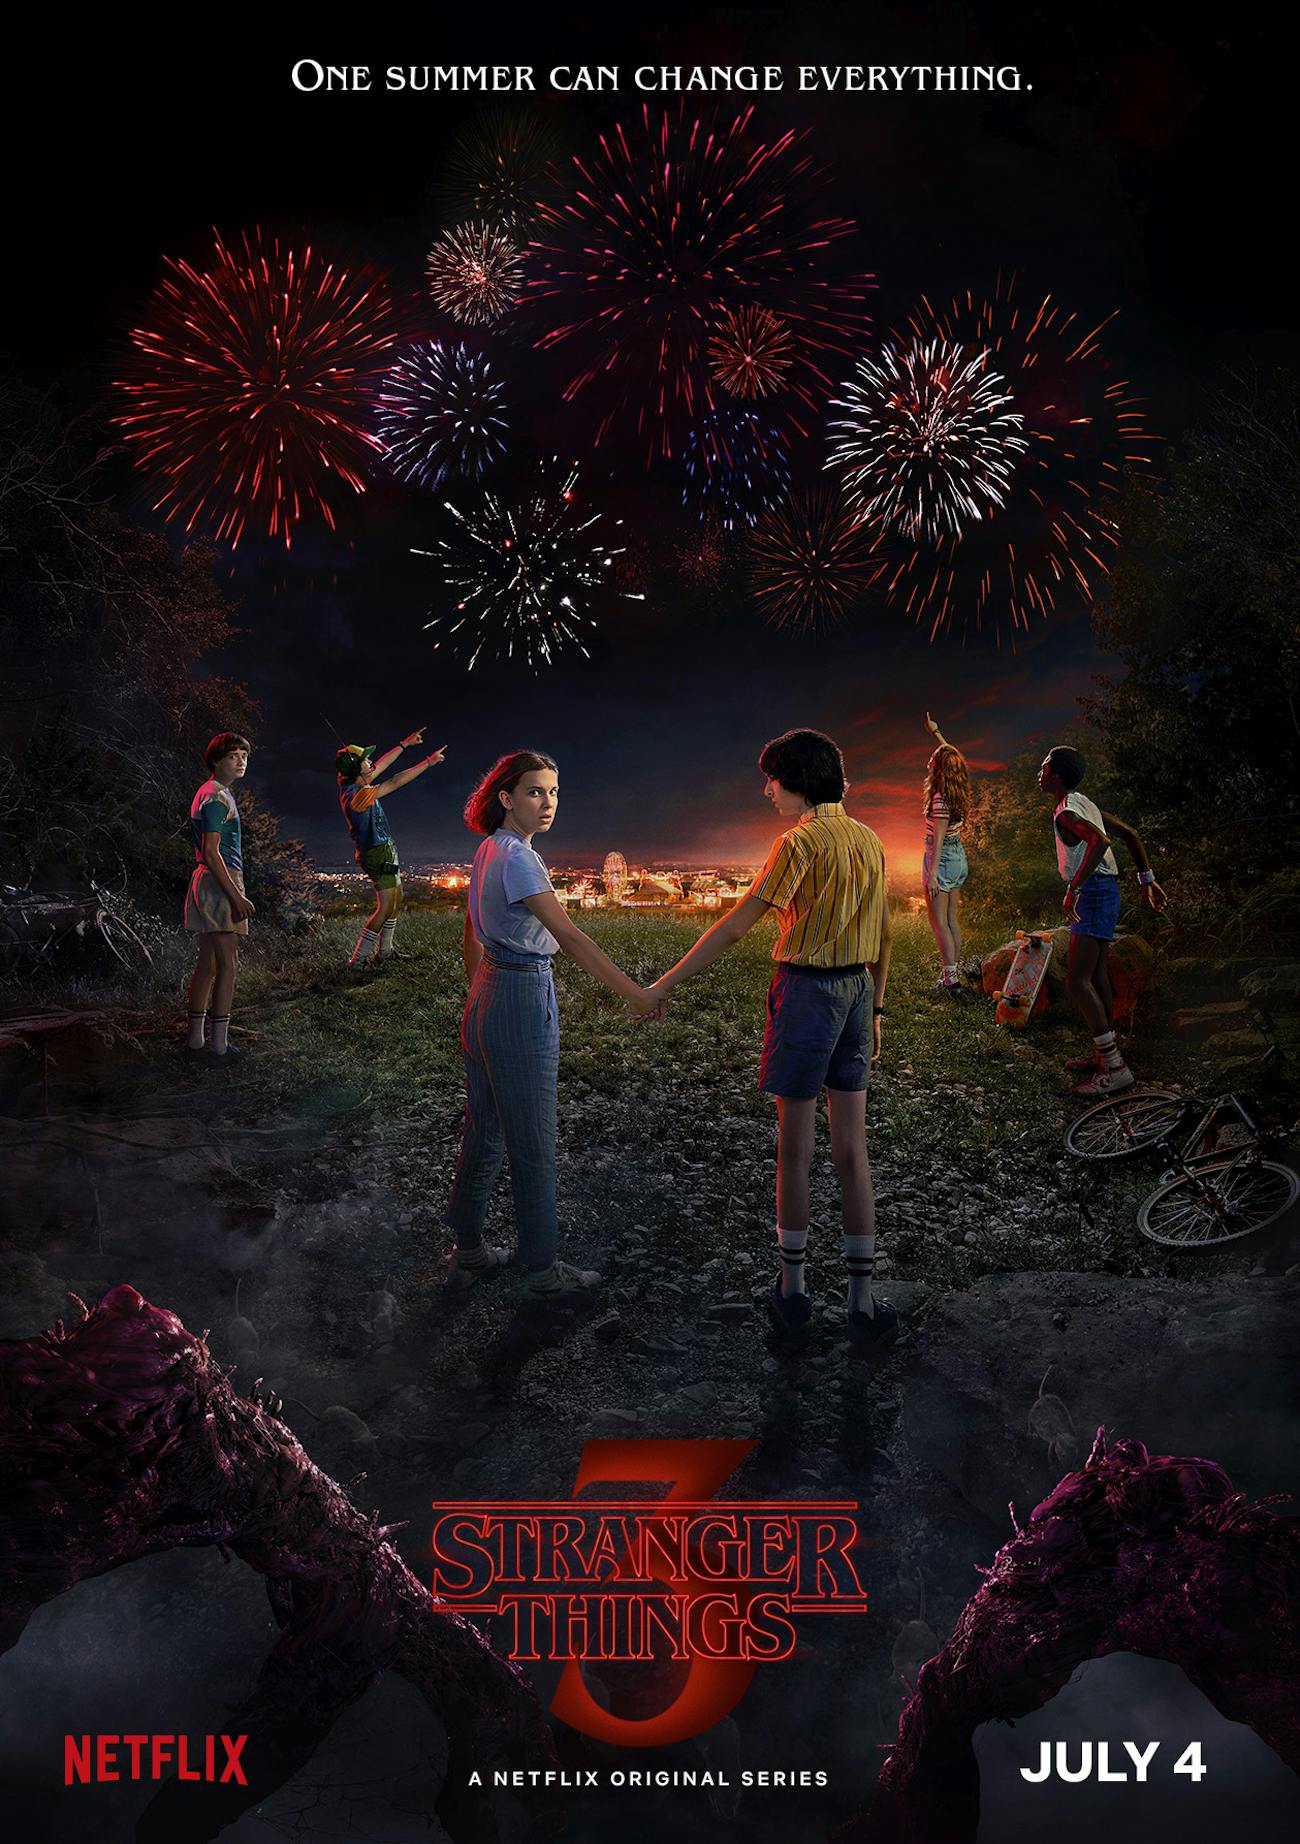 'Stranger Things' Season 3 Spoilers: 5 Huge Clues in the Trailer and Poster | Inverse1300 x 1844